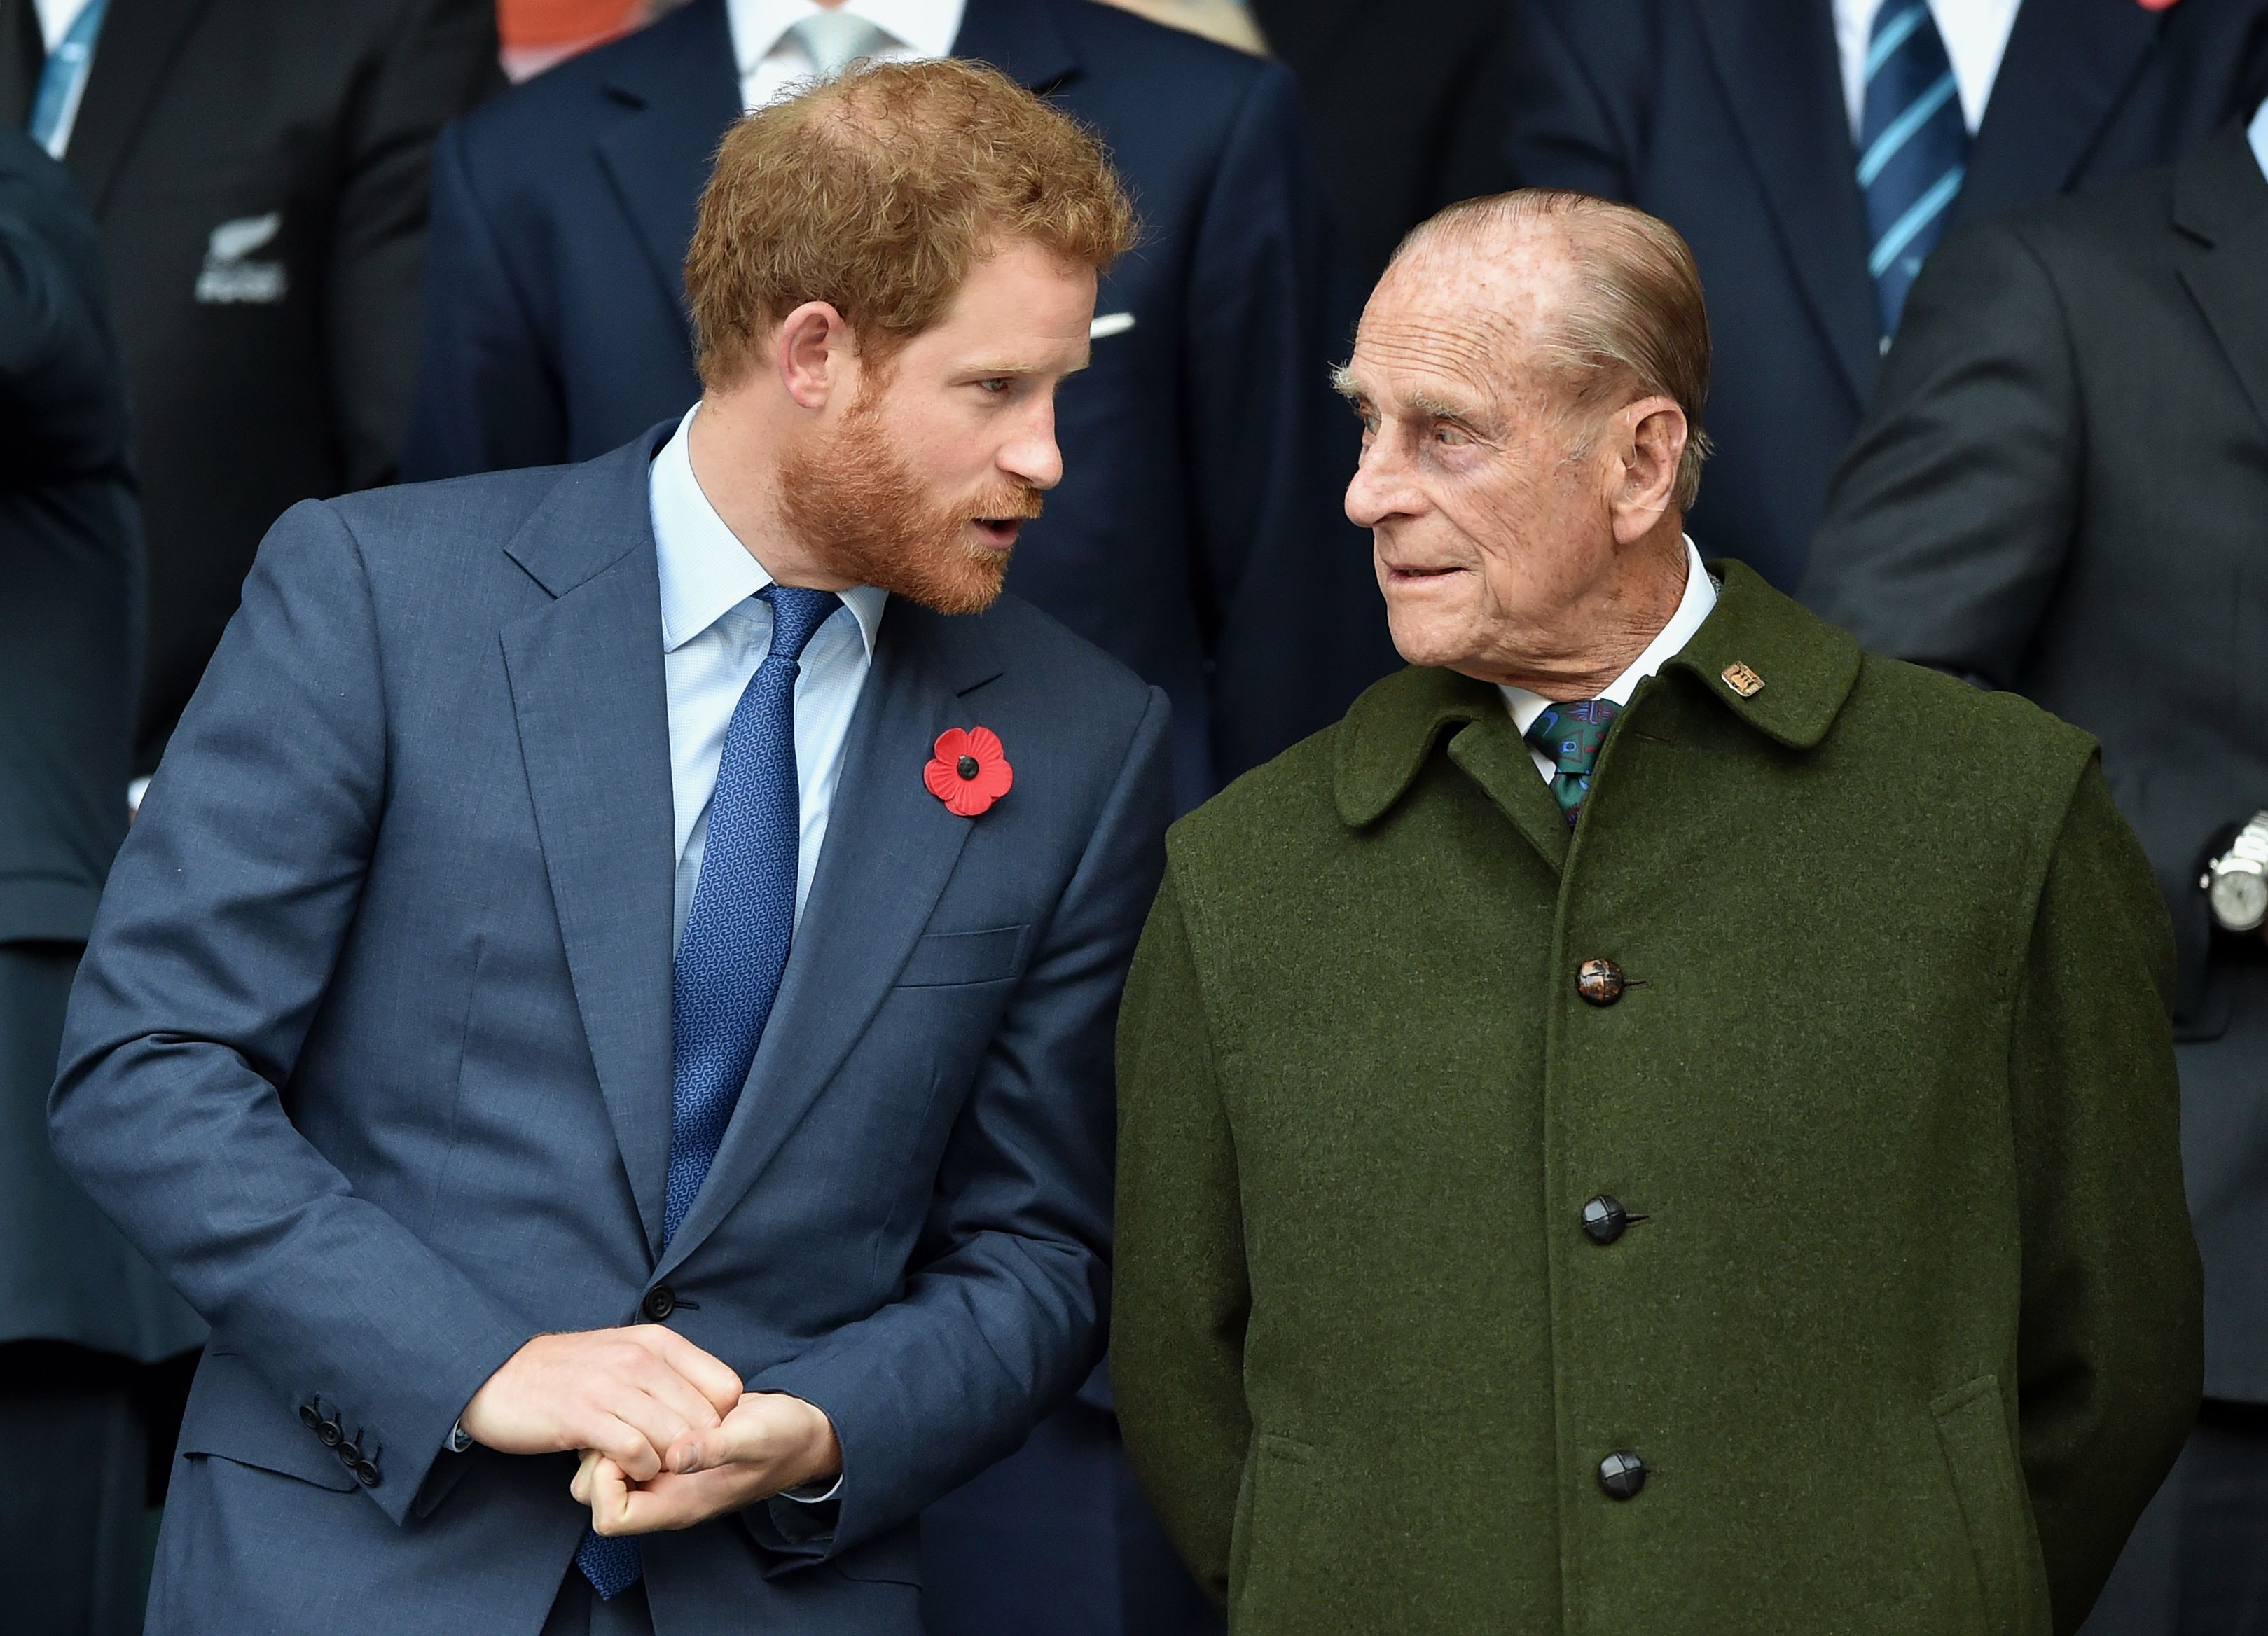 Prince Harry and Prince Philip, Duke of Edinburgh at the 2015 Rugby World Cup Final match between New Zealand and Australia at Twickenham Stadium | Photo: Getty Images